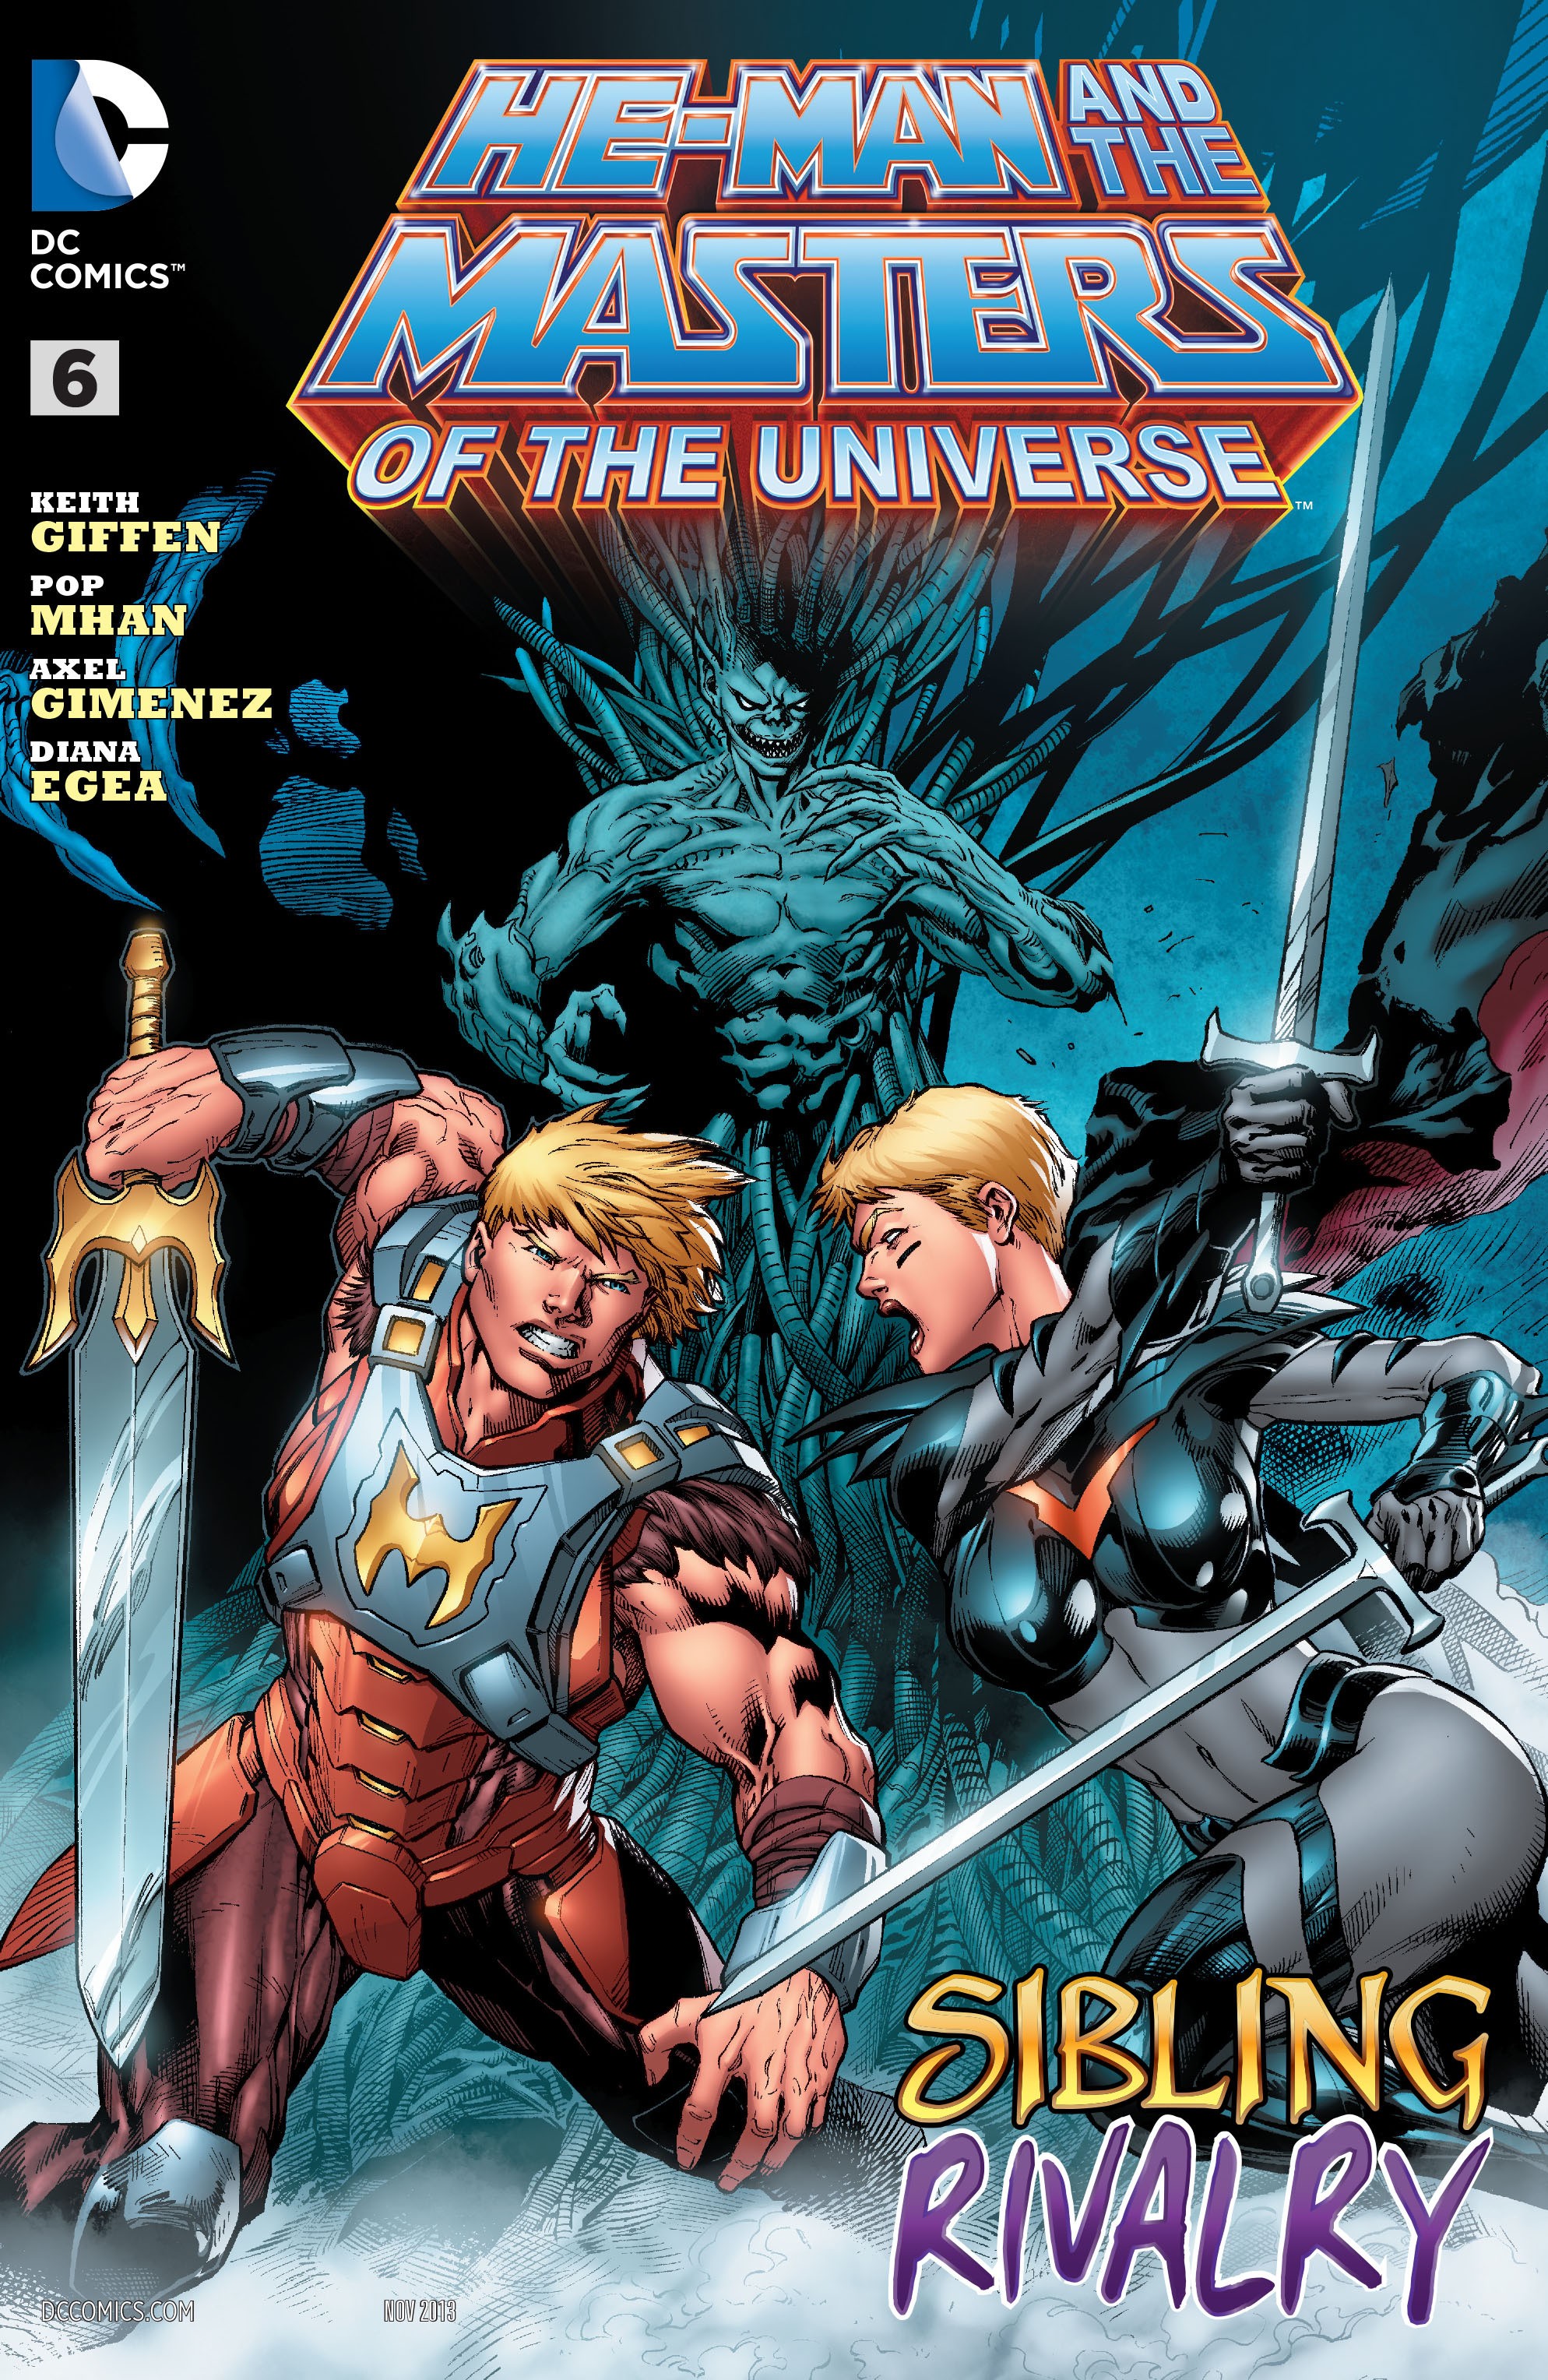 He-Man and the Masters of the Universe Vol. 2 #6